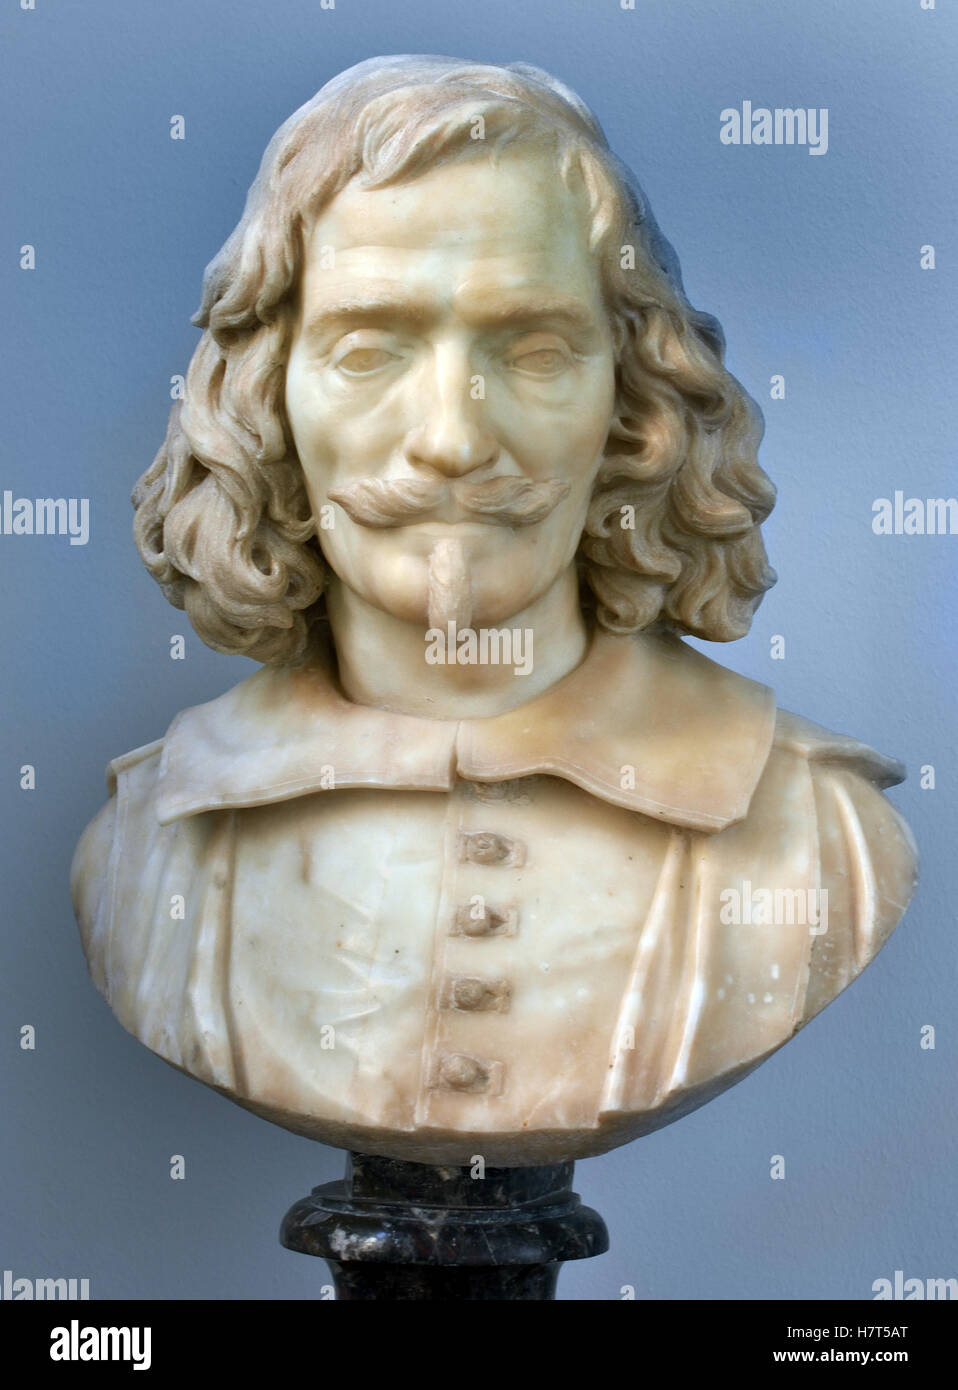 Bust of Nicolas Poussin 1594 – 1665 by Francois Duquesnoy 1597-1643  France French( Nicolas Poussin was the leading painter of the classical French Baroque style, although he spent most of his working life in Rome.) Stock Photo